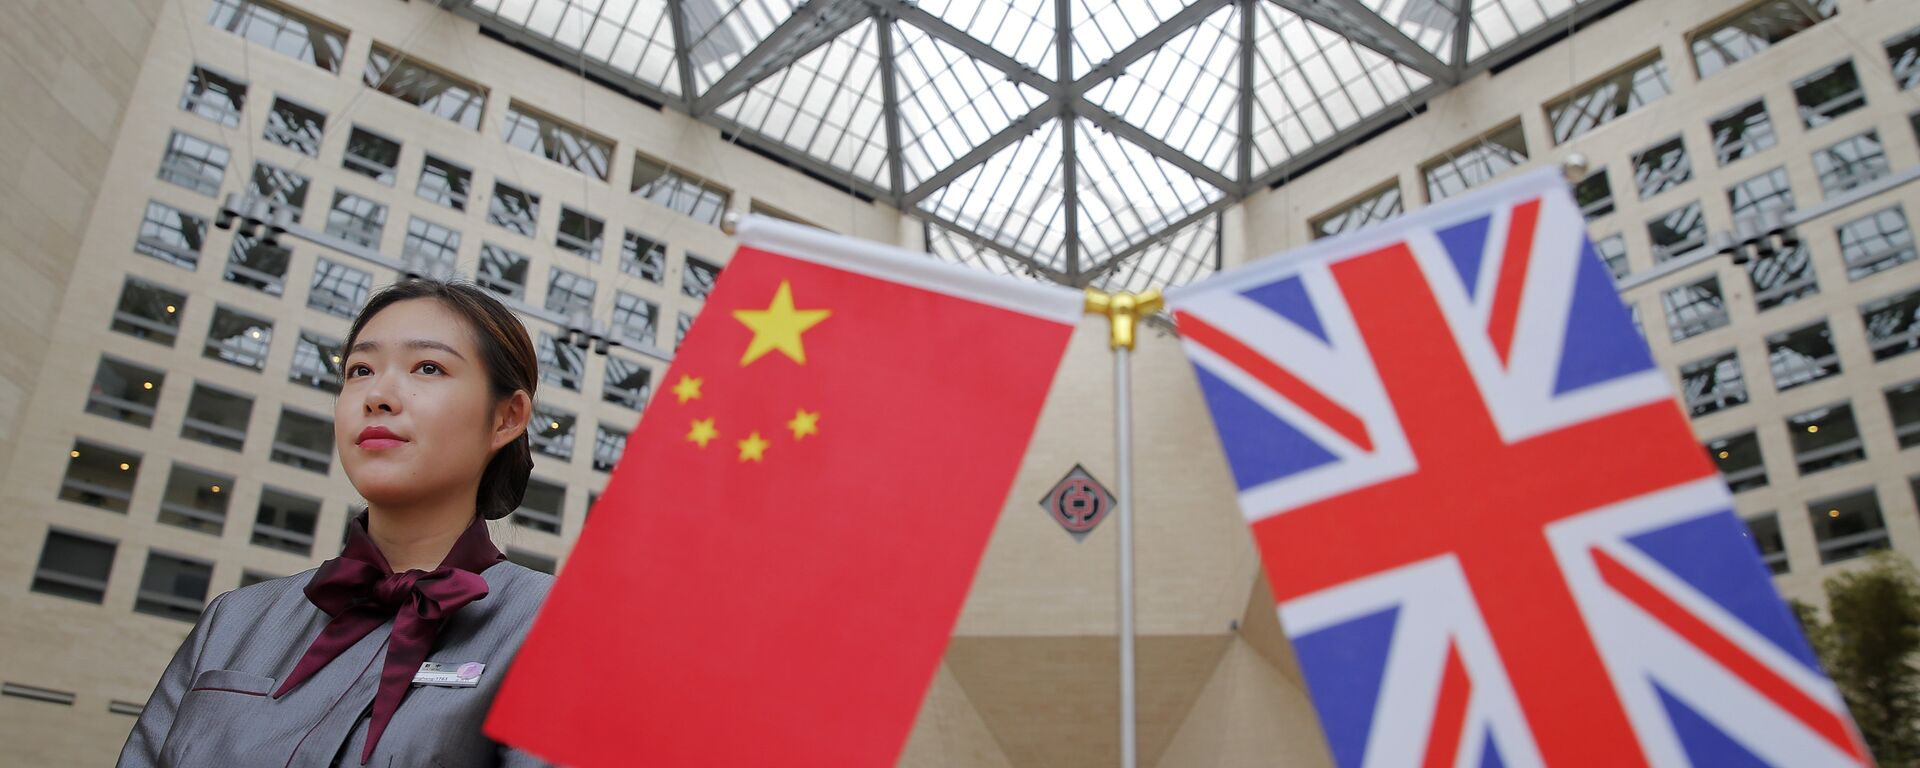 A member of staff stands behind flags as officials arrive for the UK-China High Level Financial Services Roundtable at the Bank of China head office building in Beijing on July 22, 2016 - Sputnik International, 1920, 17.11.2022